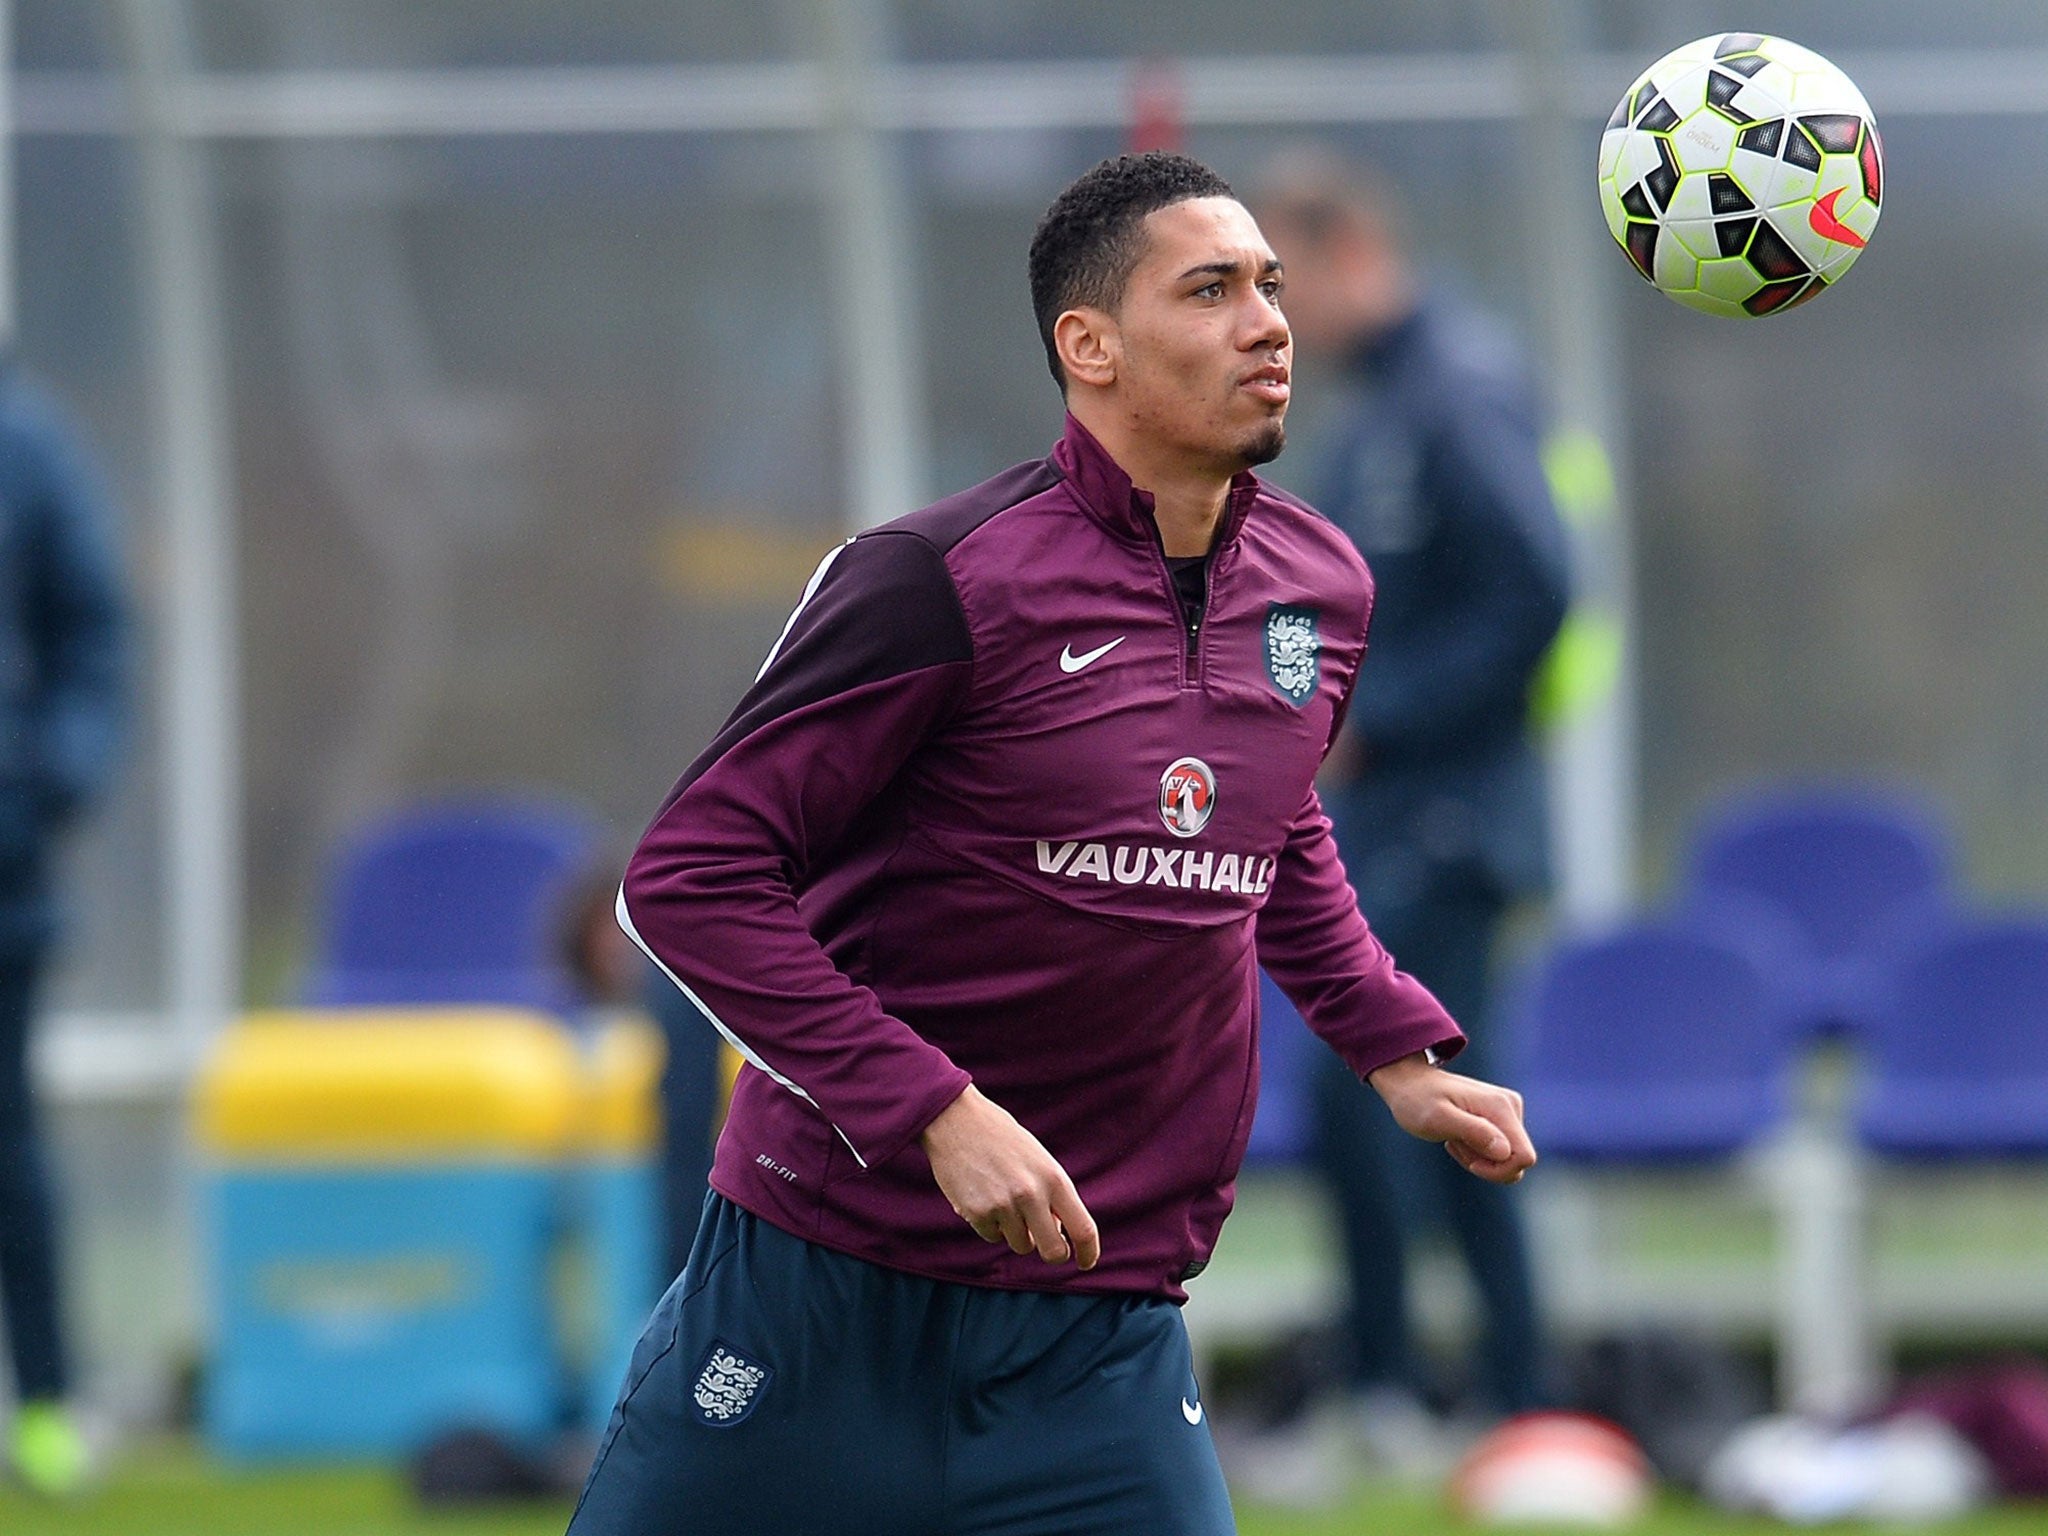 Chris Smalling in training with the England squad